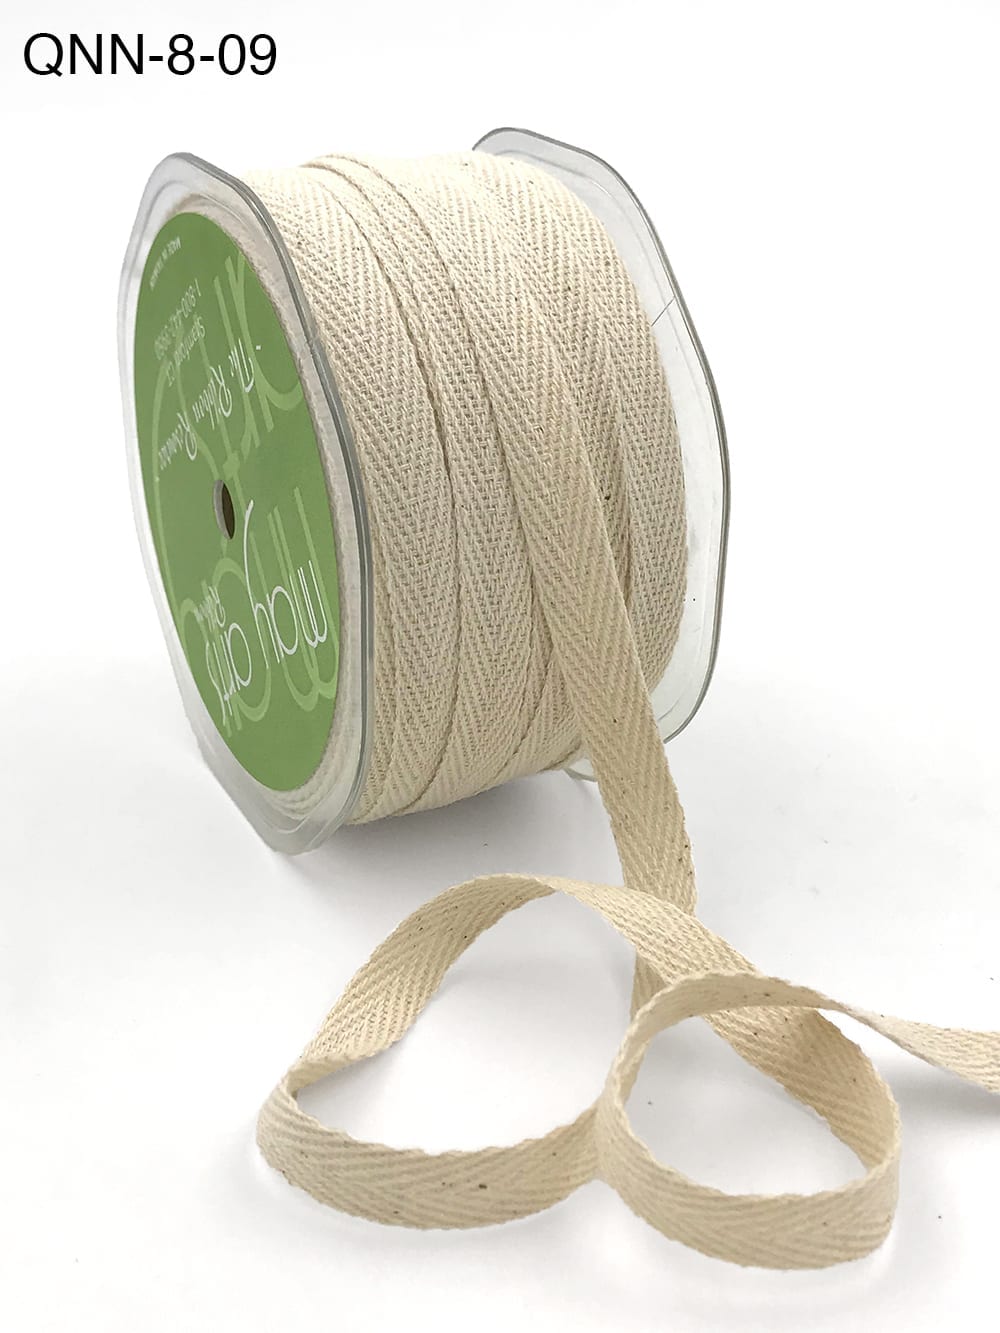 Flax & Twine Cotton Twill Tape 3/8 Inch - The Websters